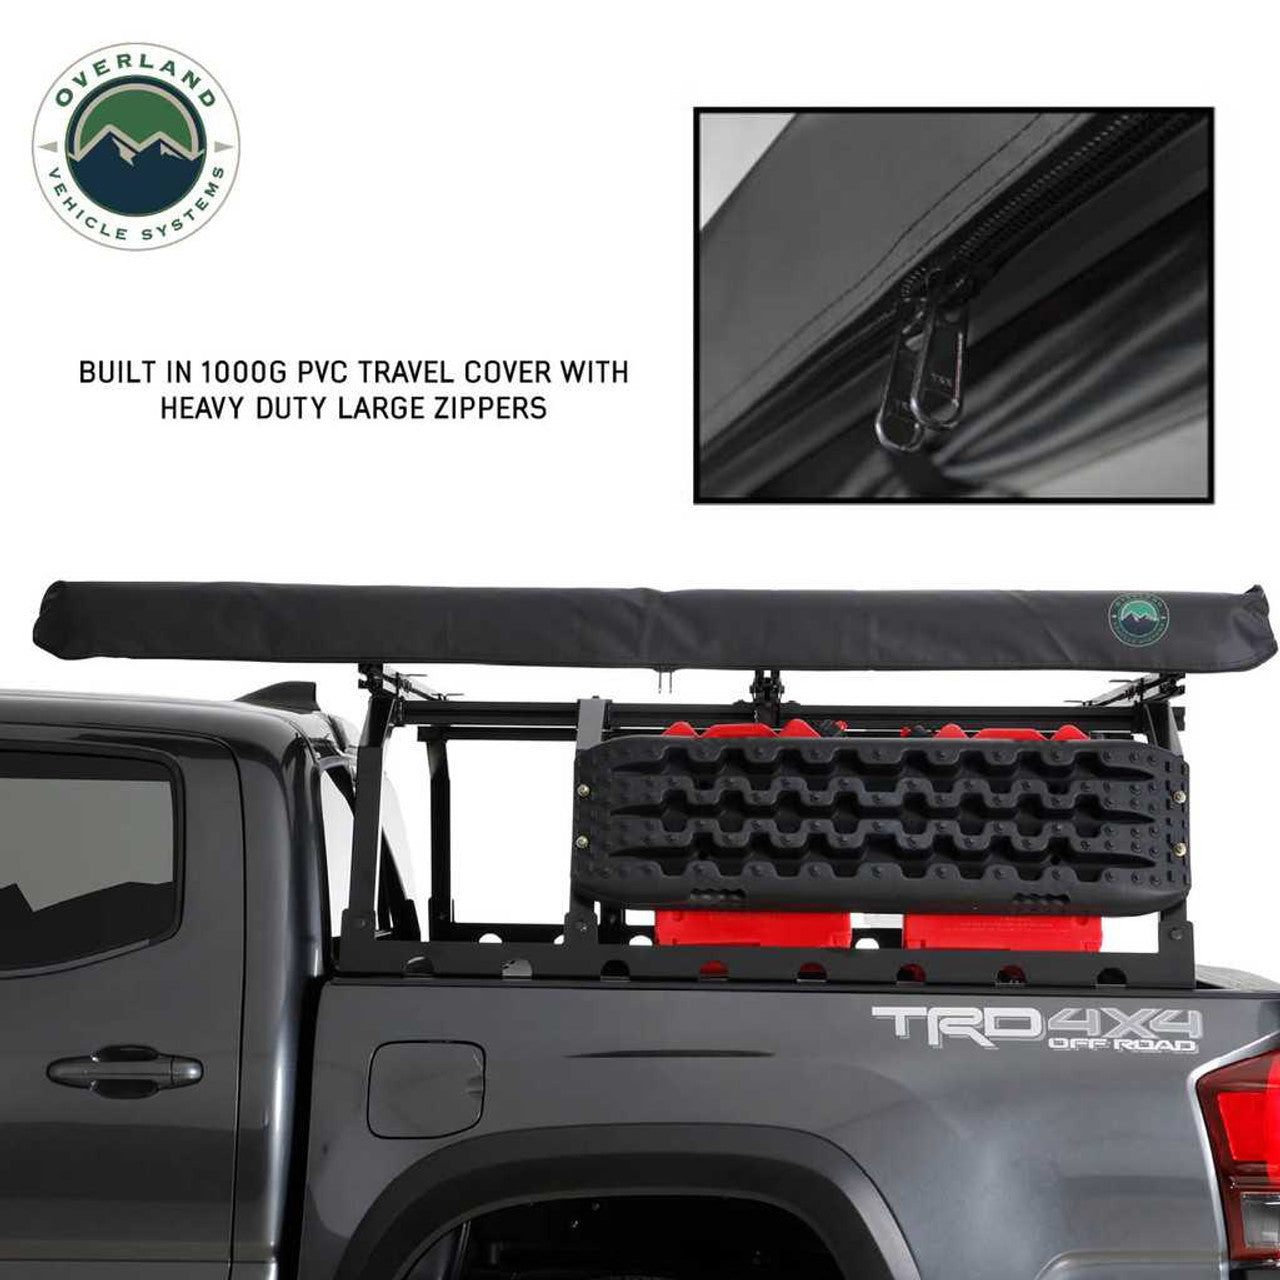 OVS Nomadic Awning 2.0 - 6.5' With Black Cover